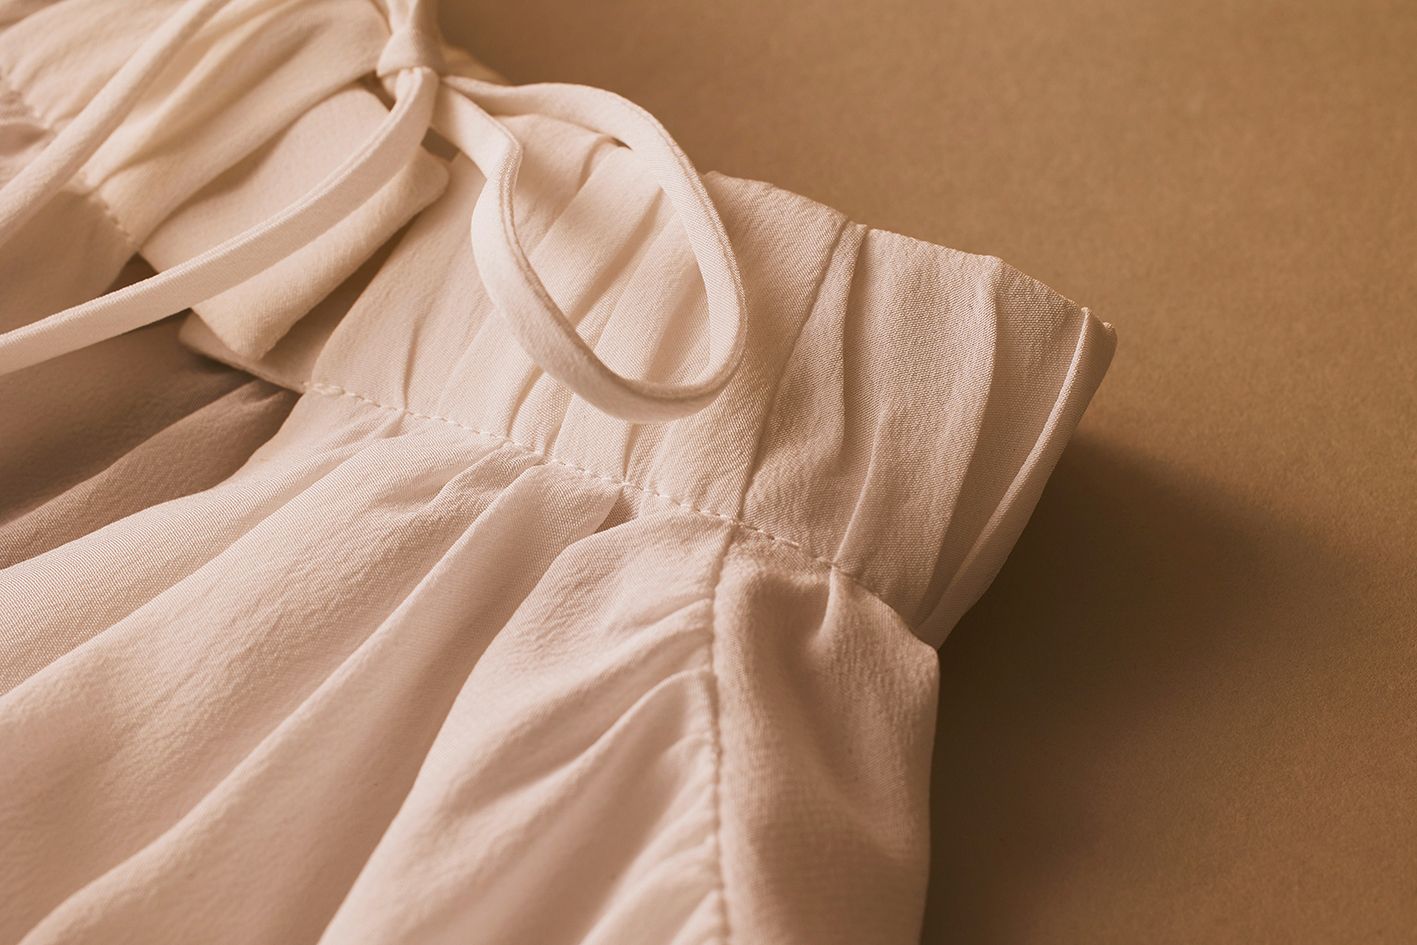 Scanlan Theodore silk blouse with close detailed view of silk fabrication and collar